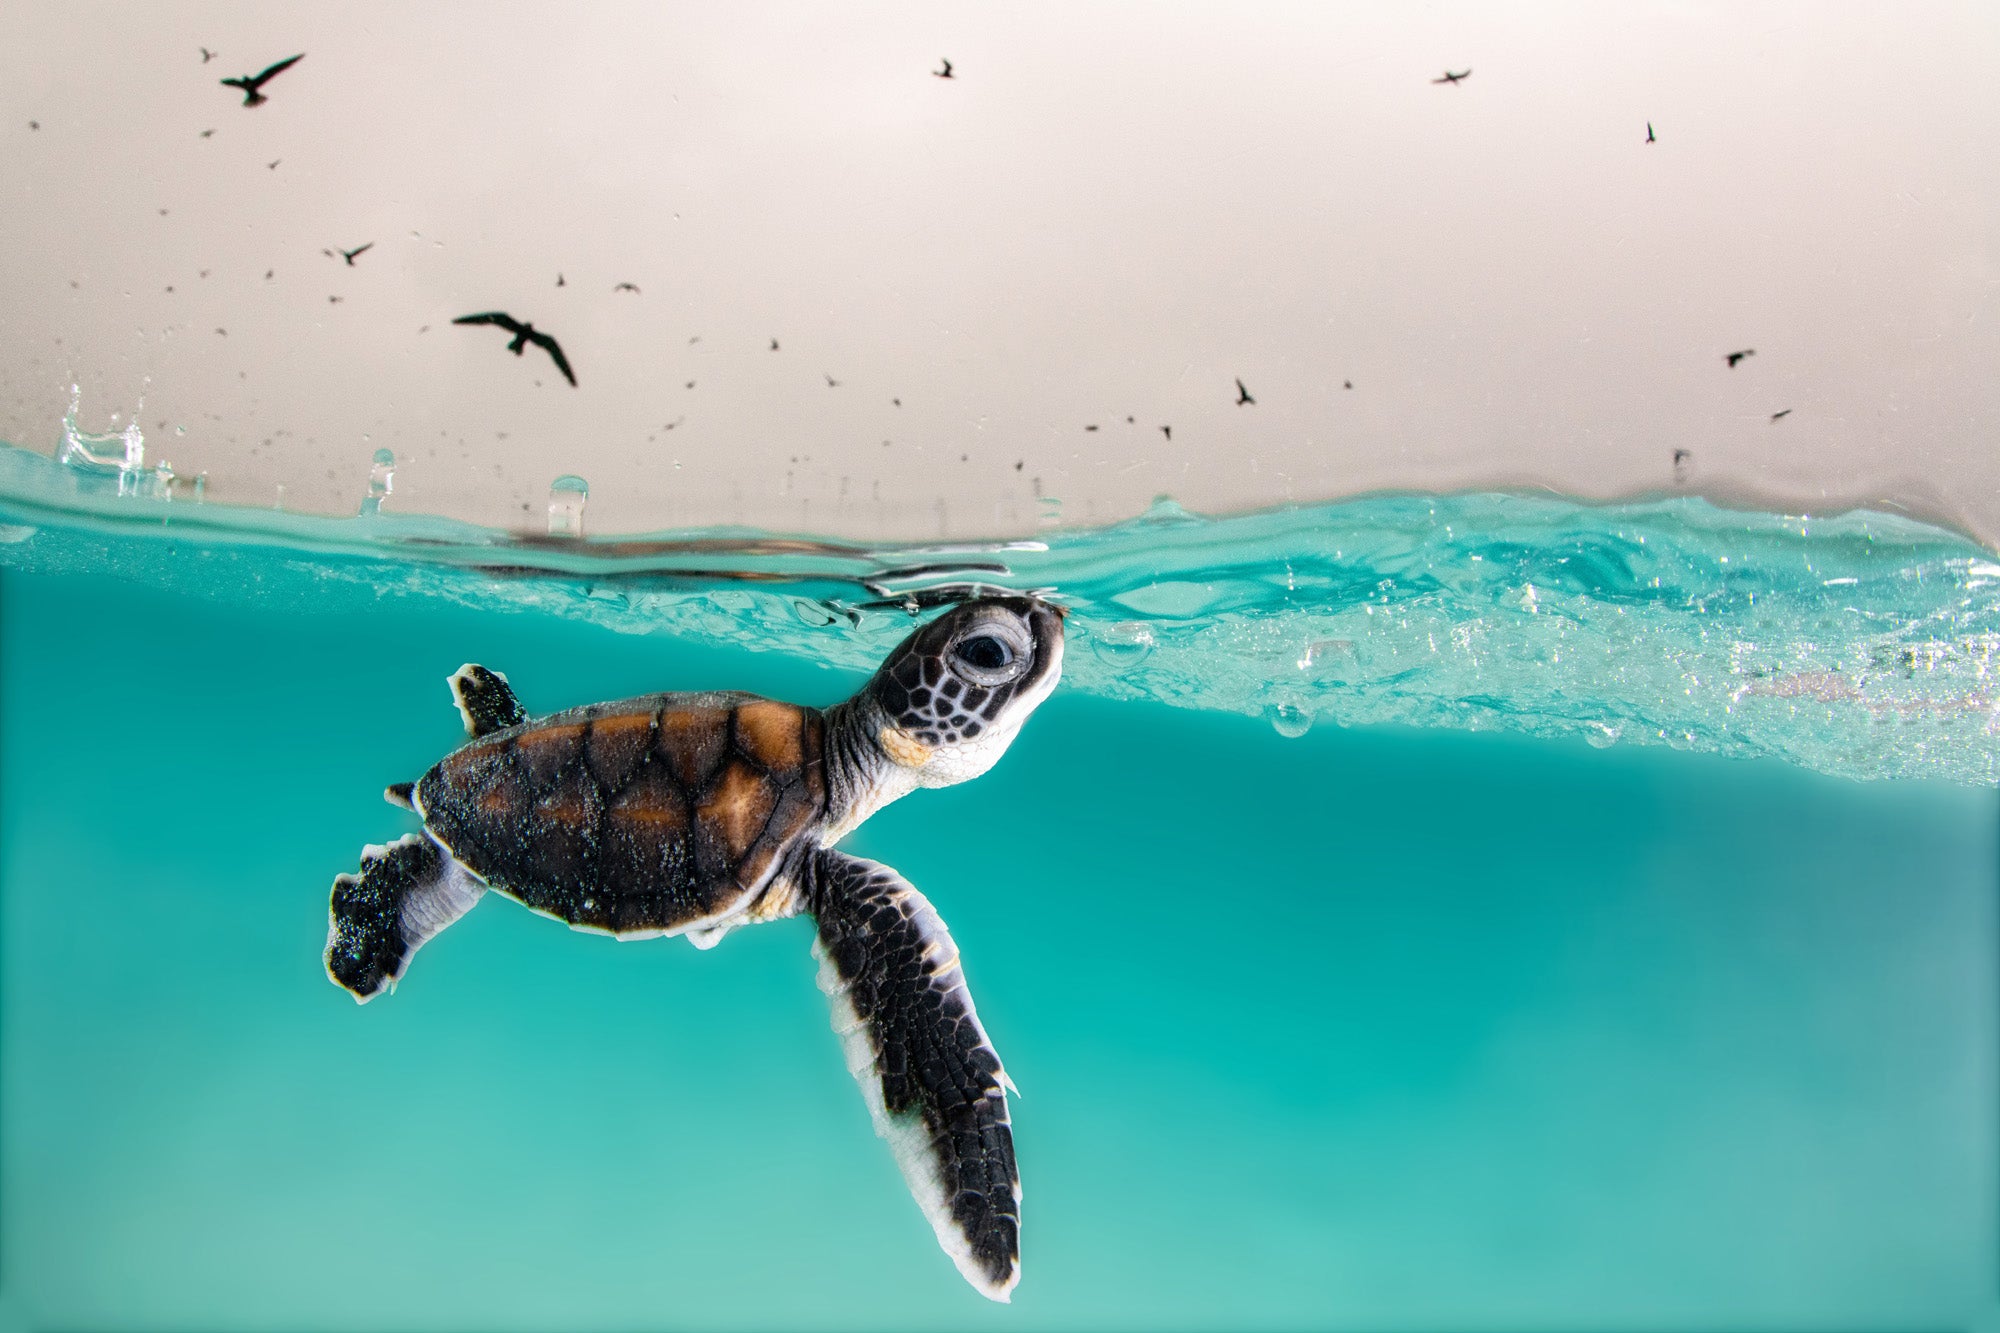 A green sea turtle hatchling cautiously surfaces for air in a sky full of hungry birds.